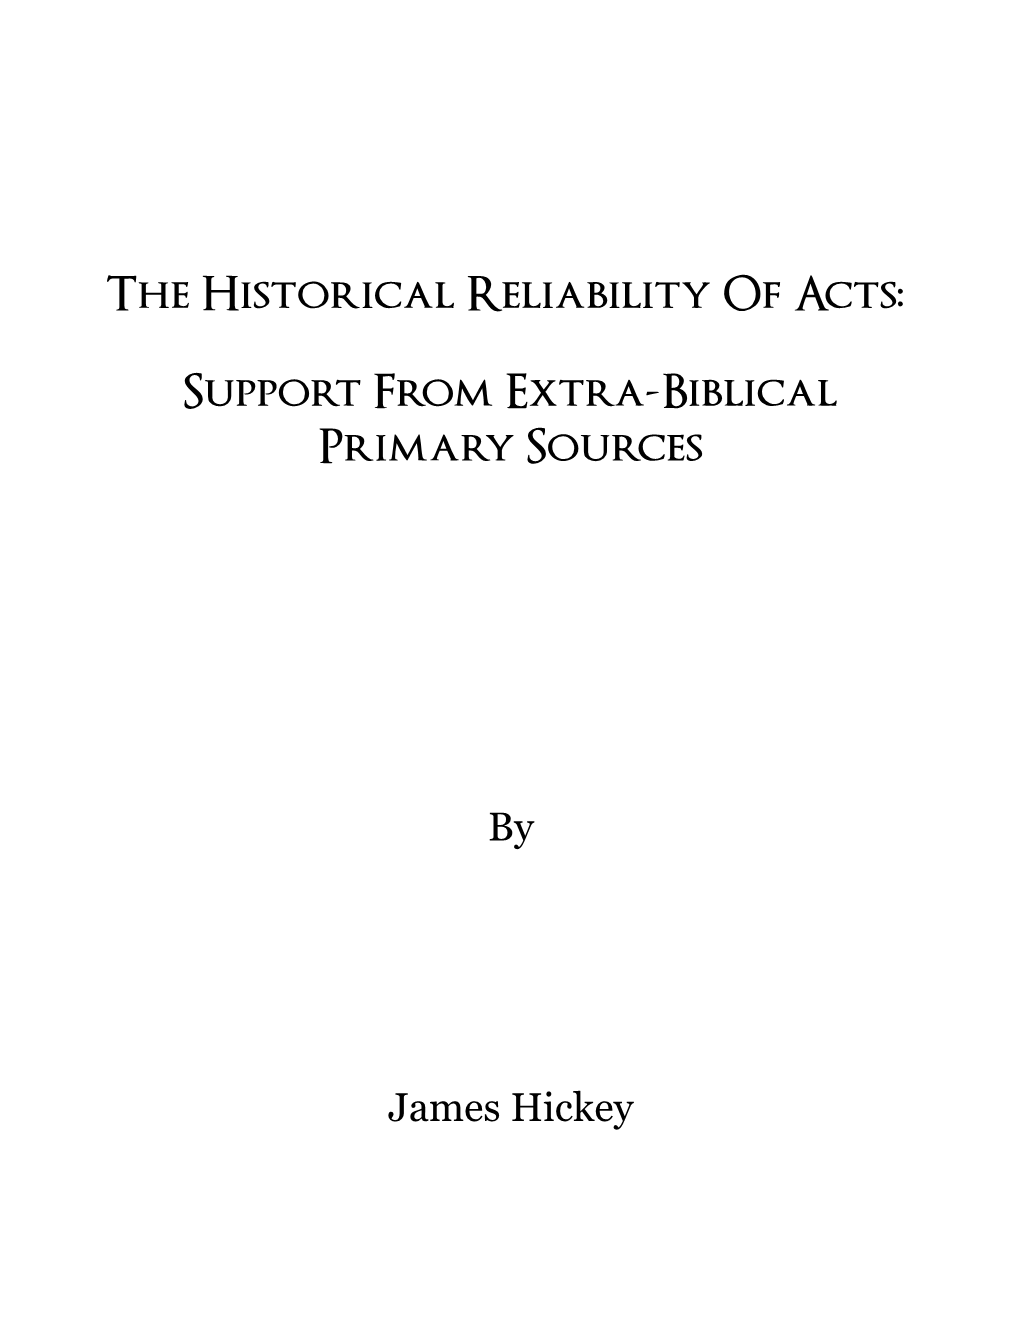 The Historical Reliability of Acts: Support from Extra